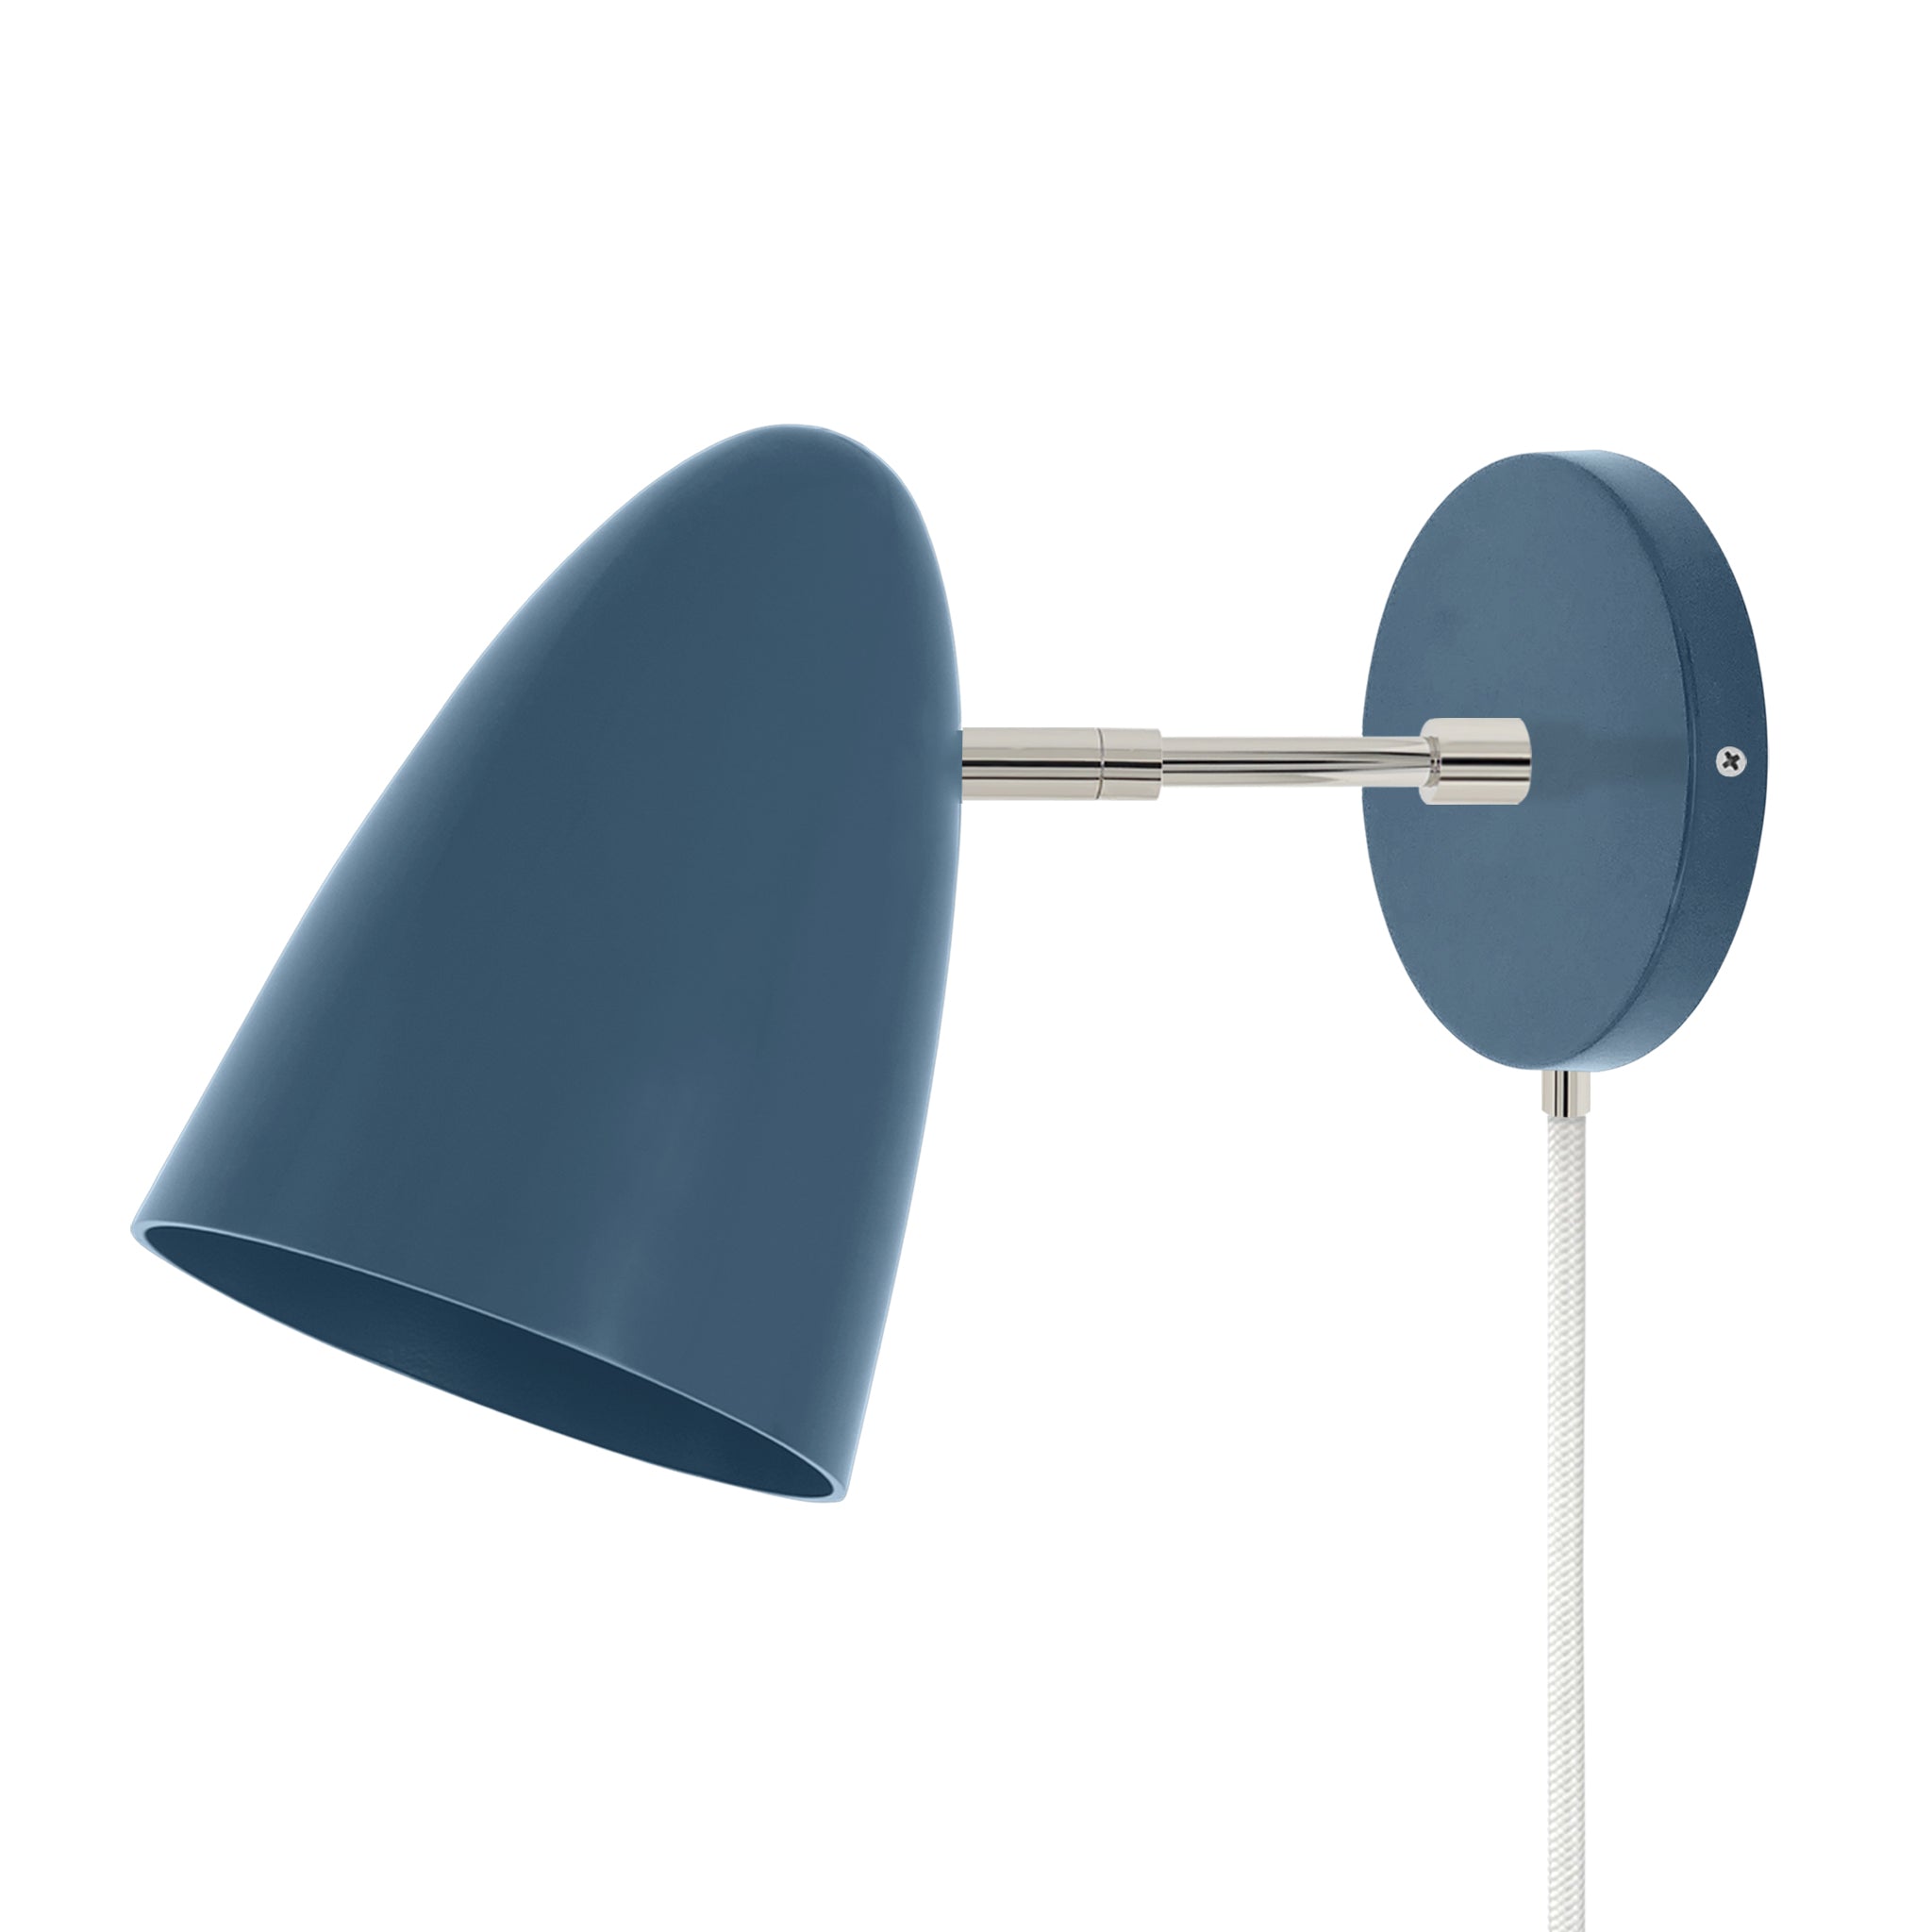 Nickel and slate blue color Boom plug-in sconce 3" arm Dutton Brown lighting